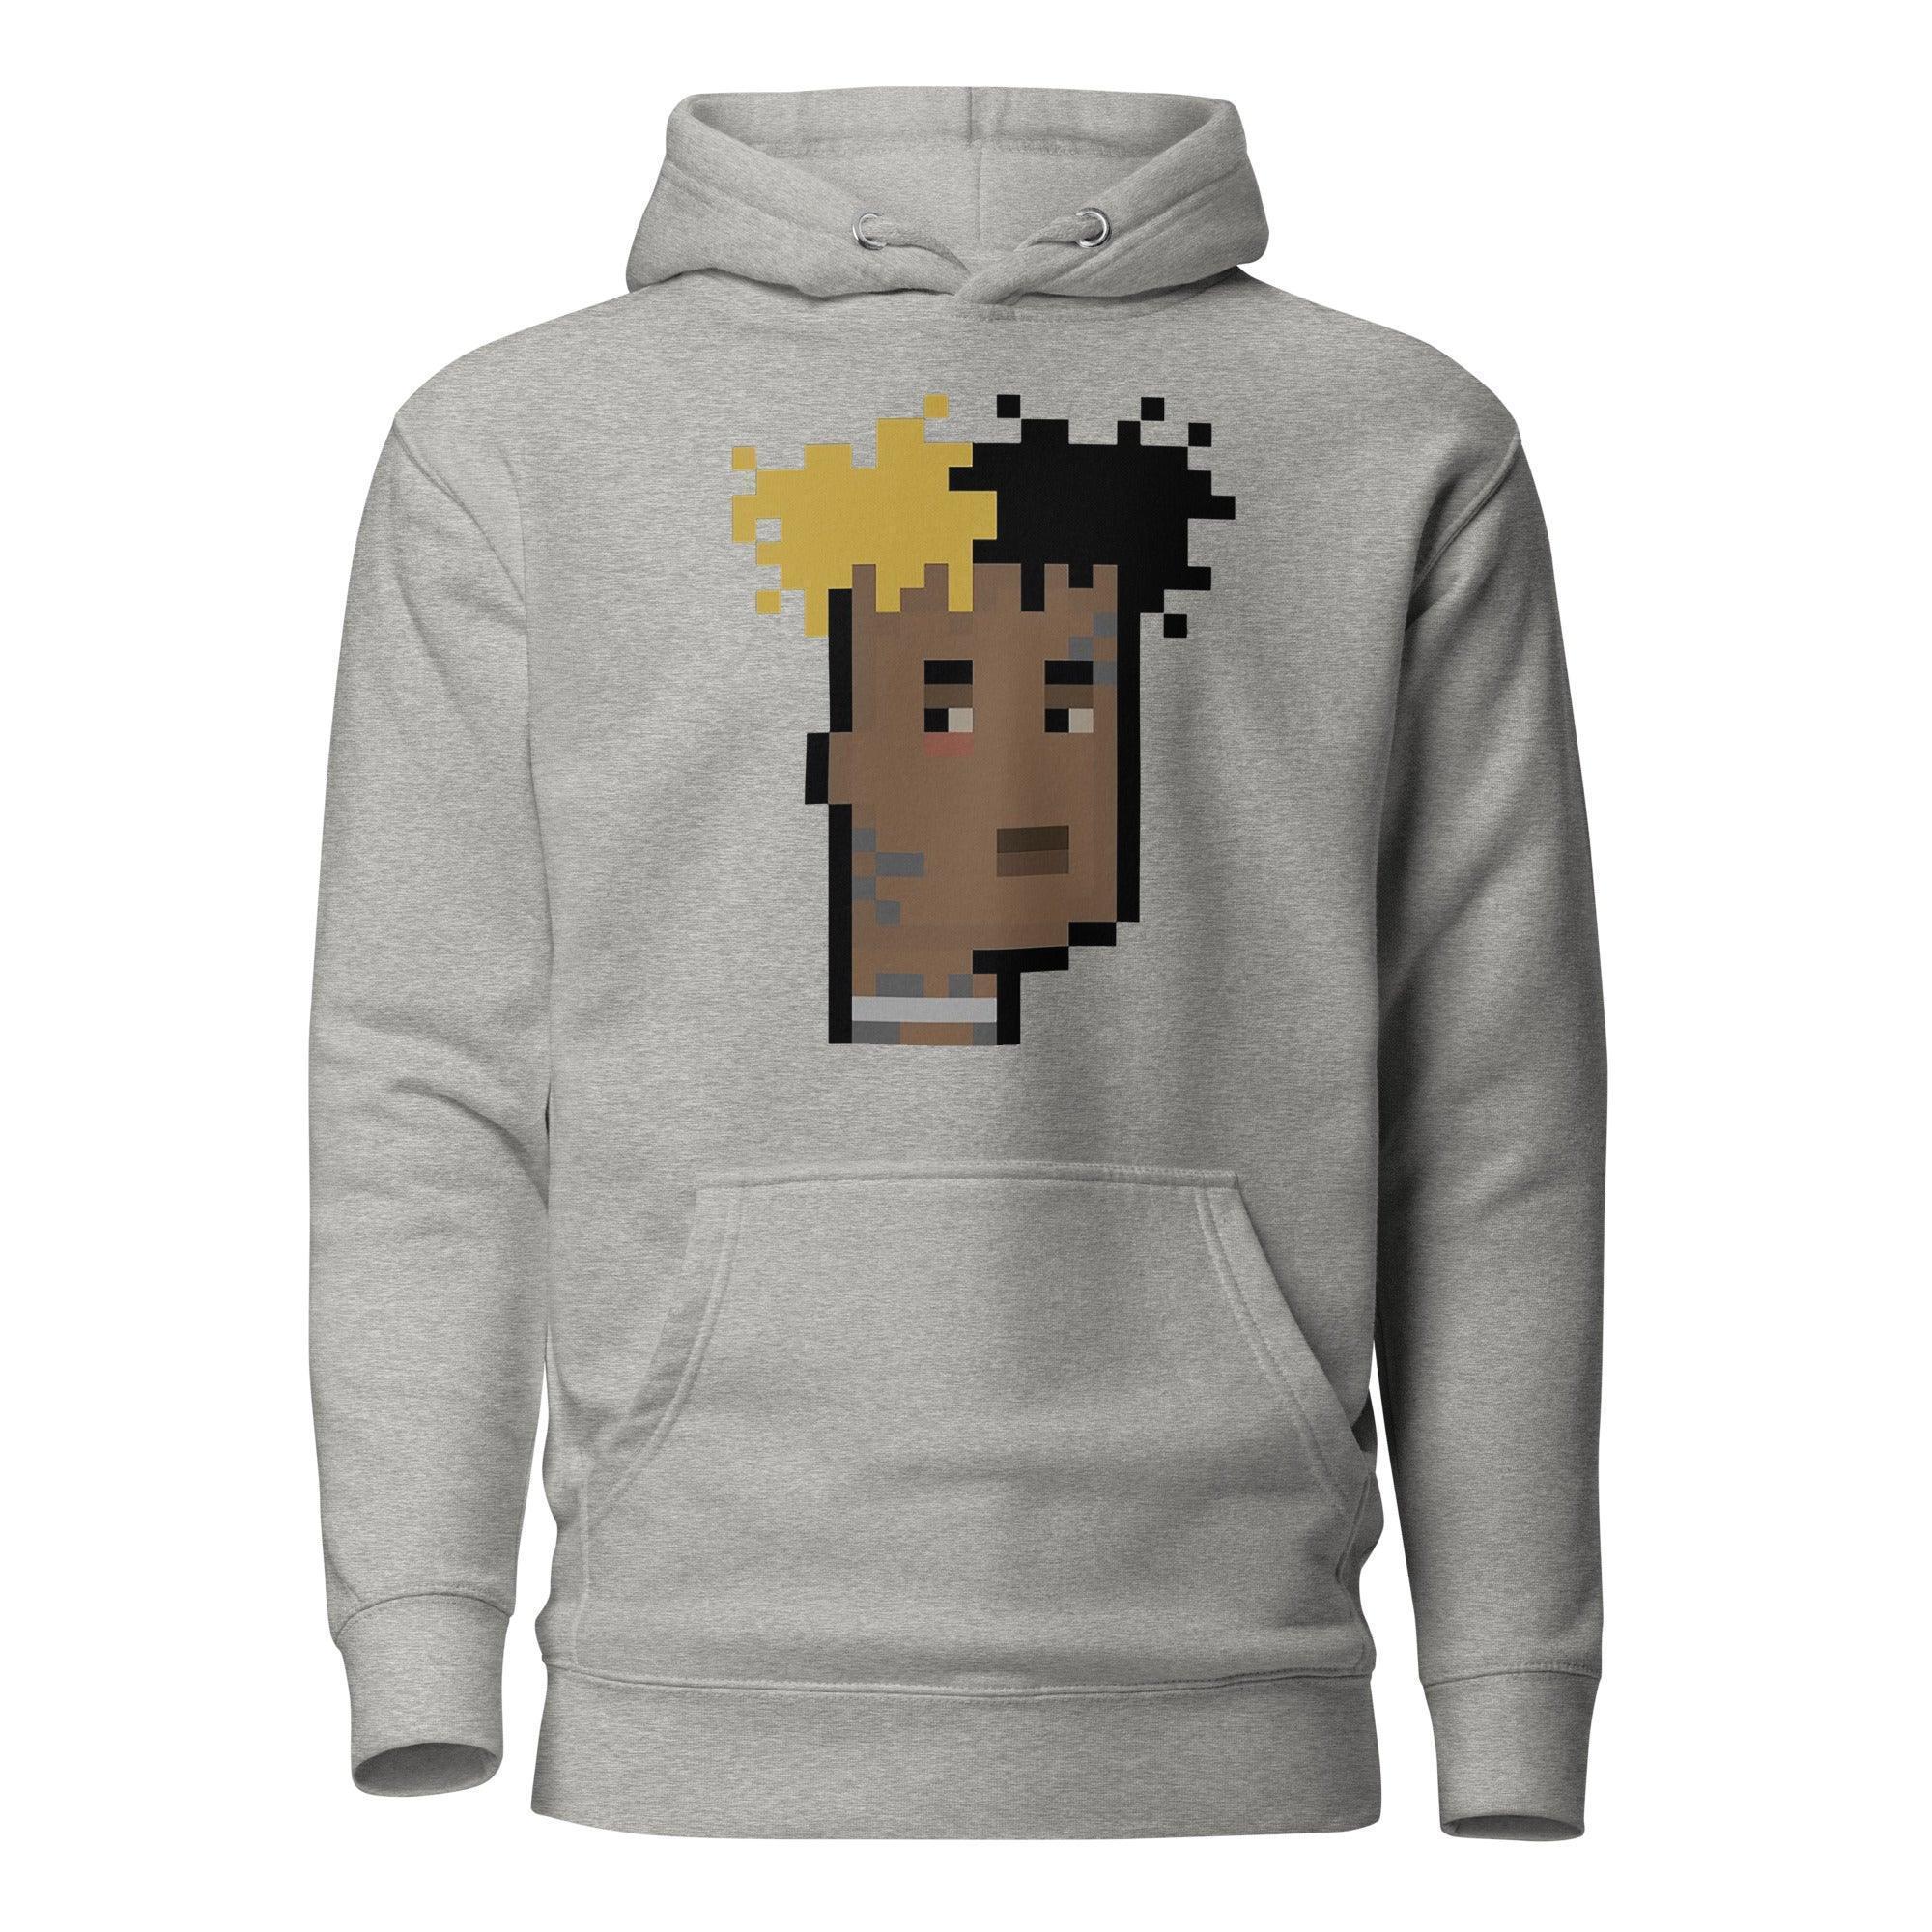 Celebrity Punk 6 Pullover Hoodie - InvestmenTees